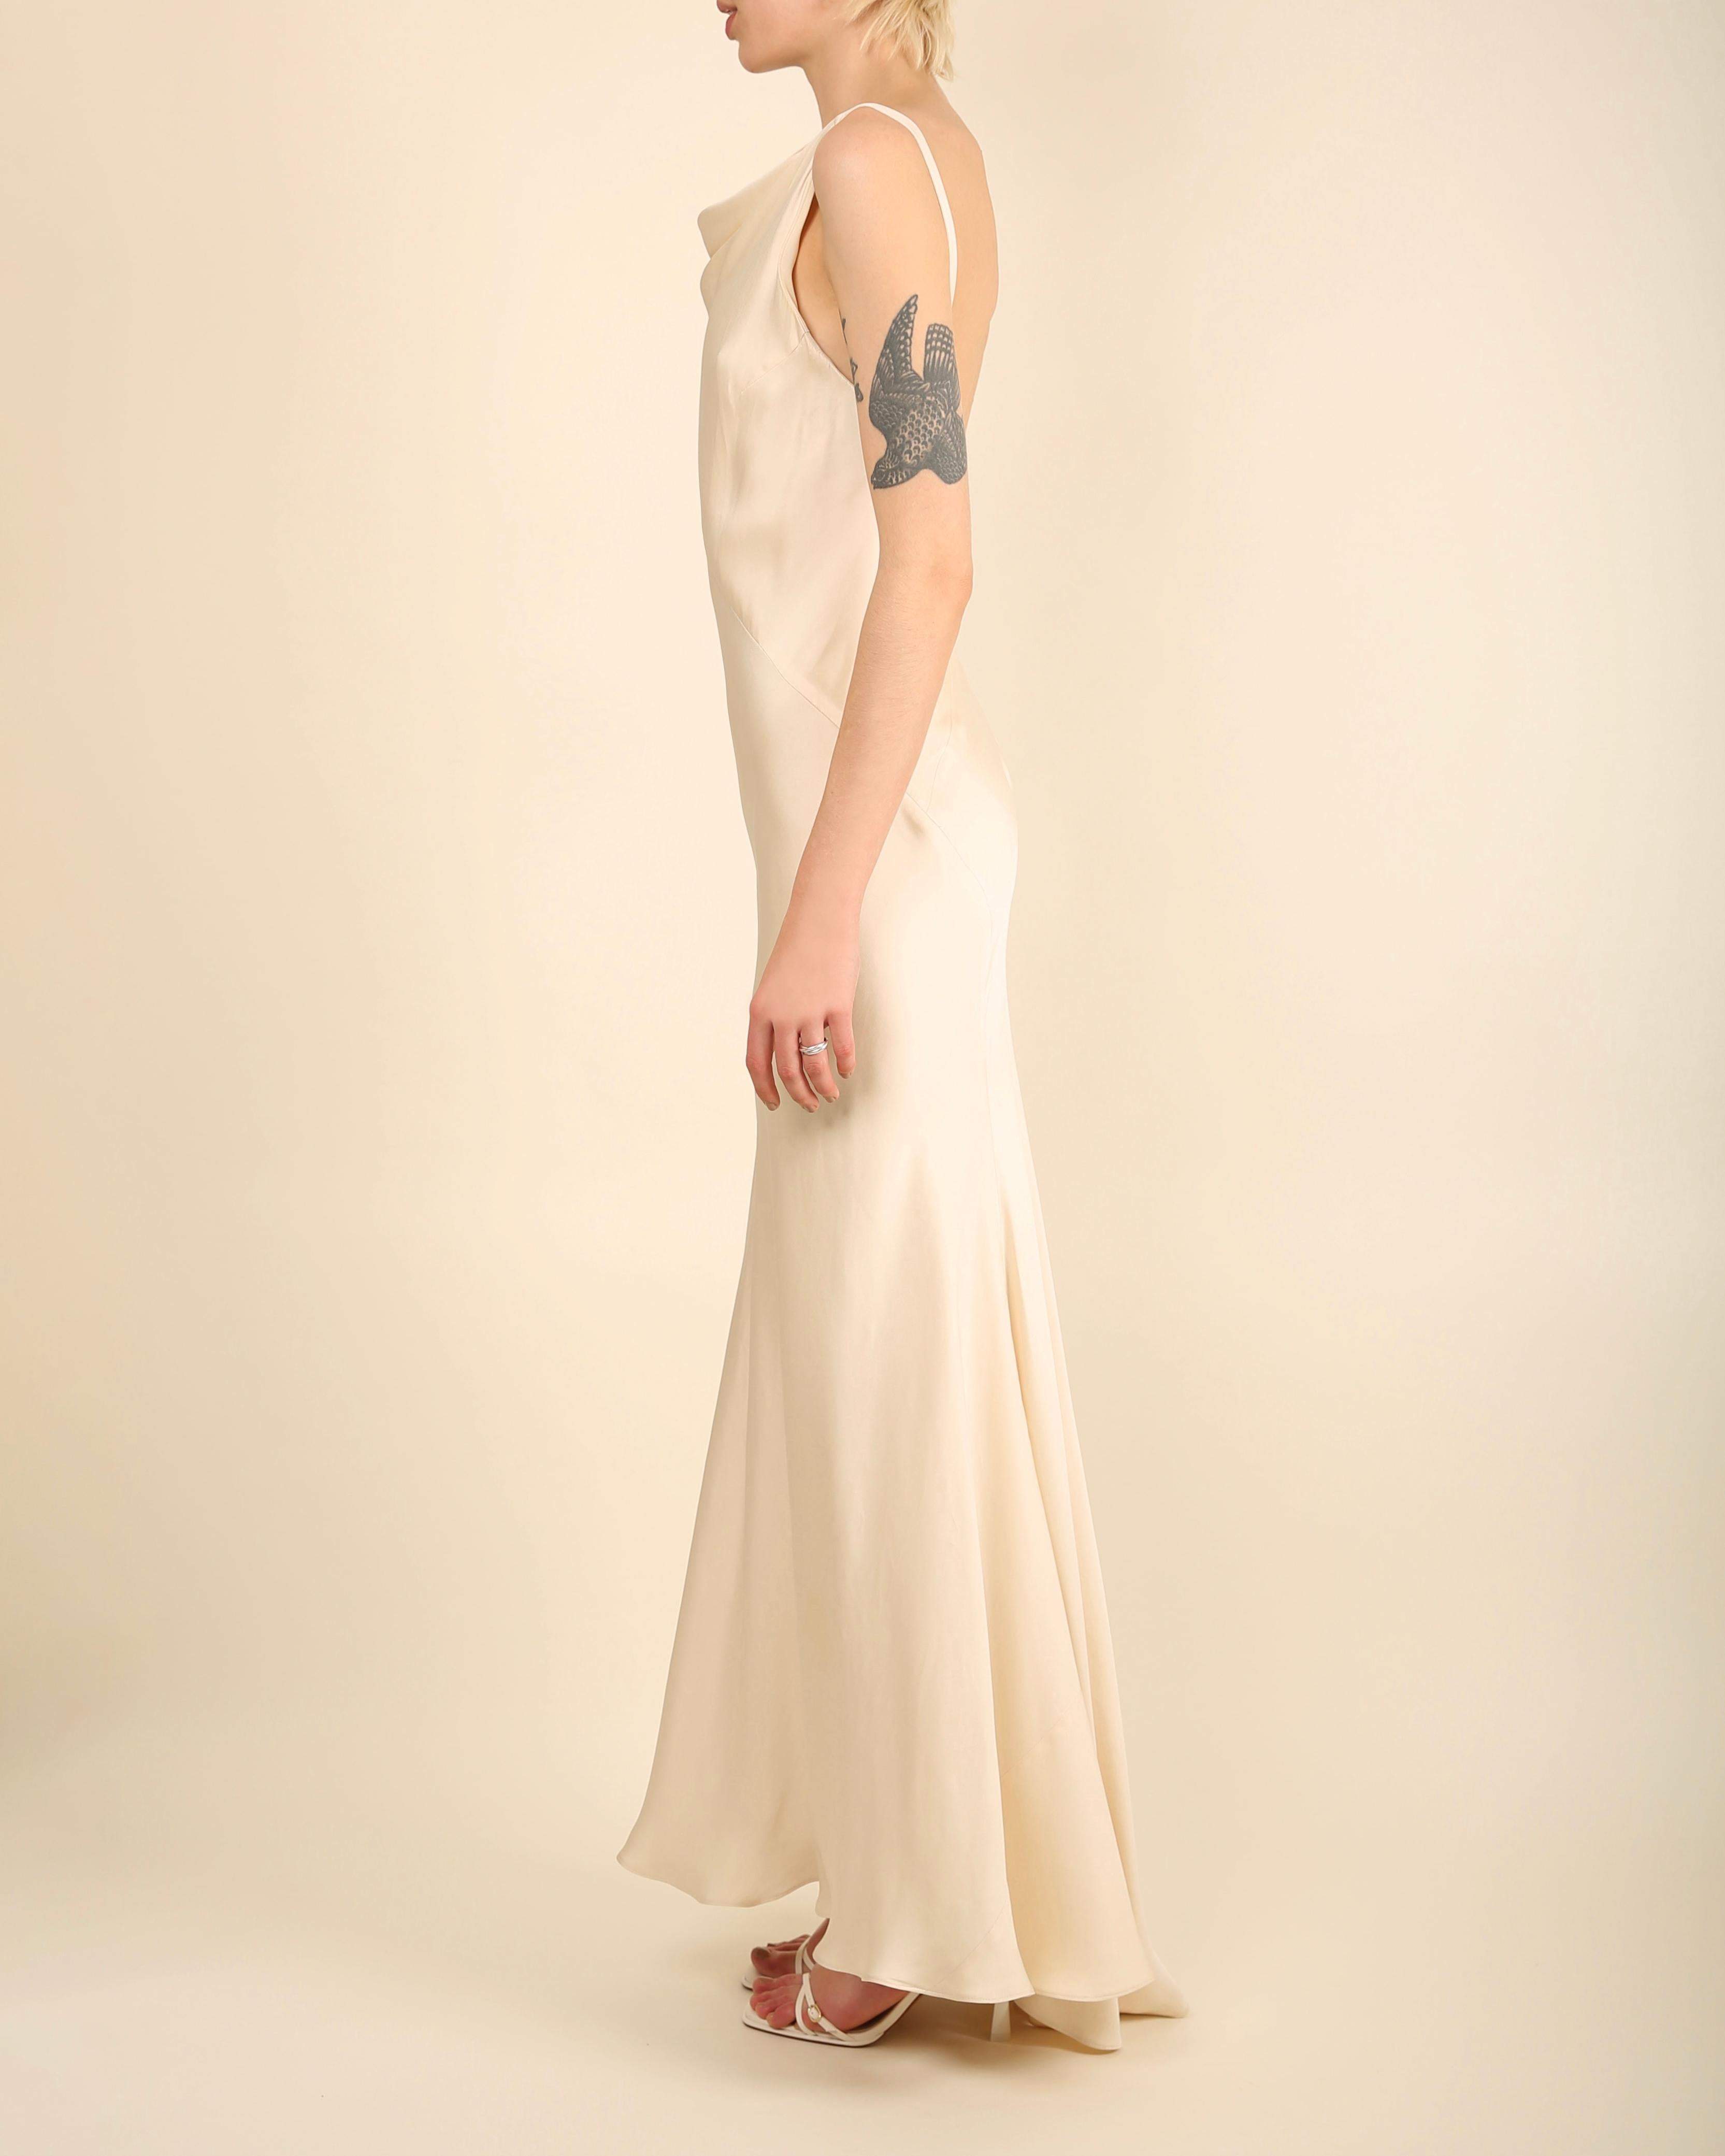 Ralph Lauren champagne bias cut backless silk slip style backless gown dress For Sale 3